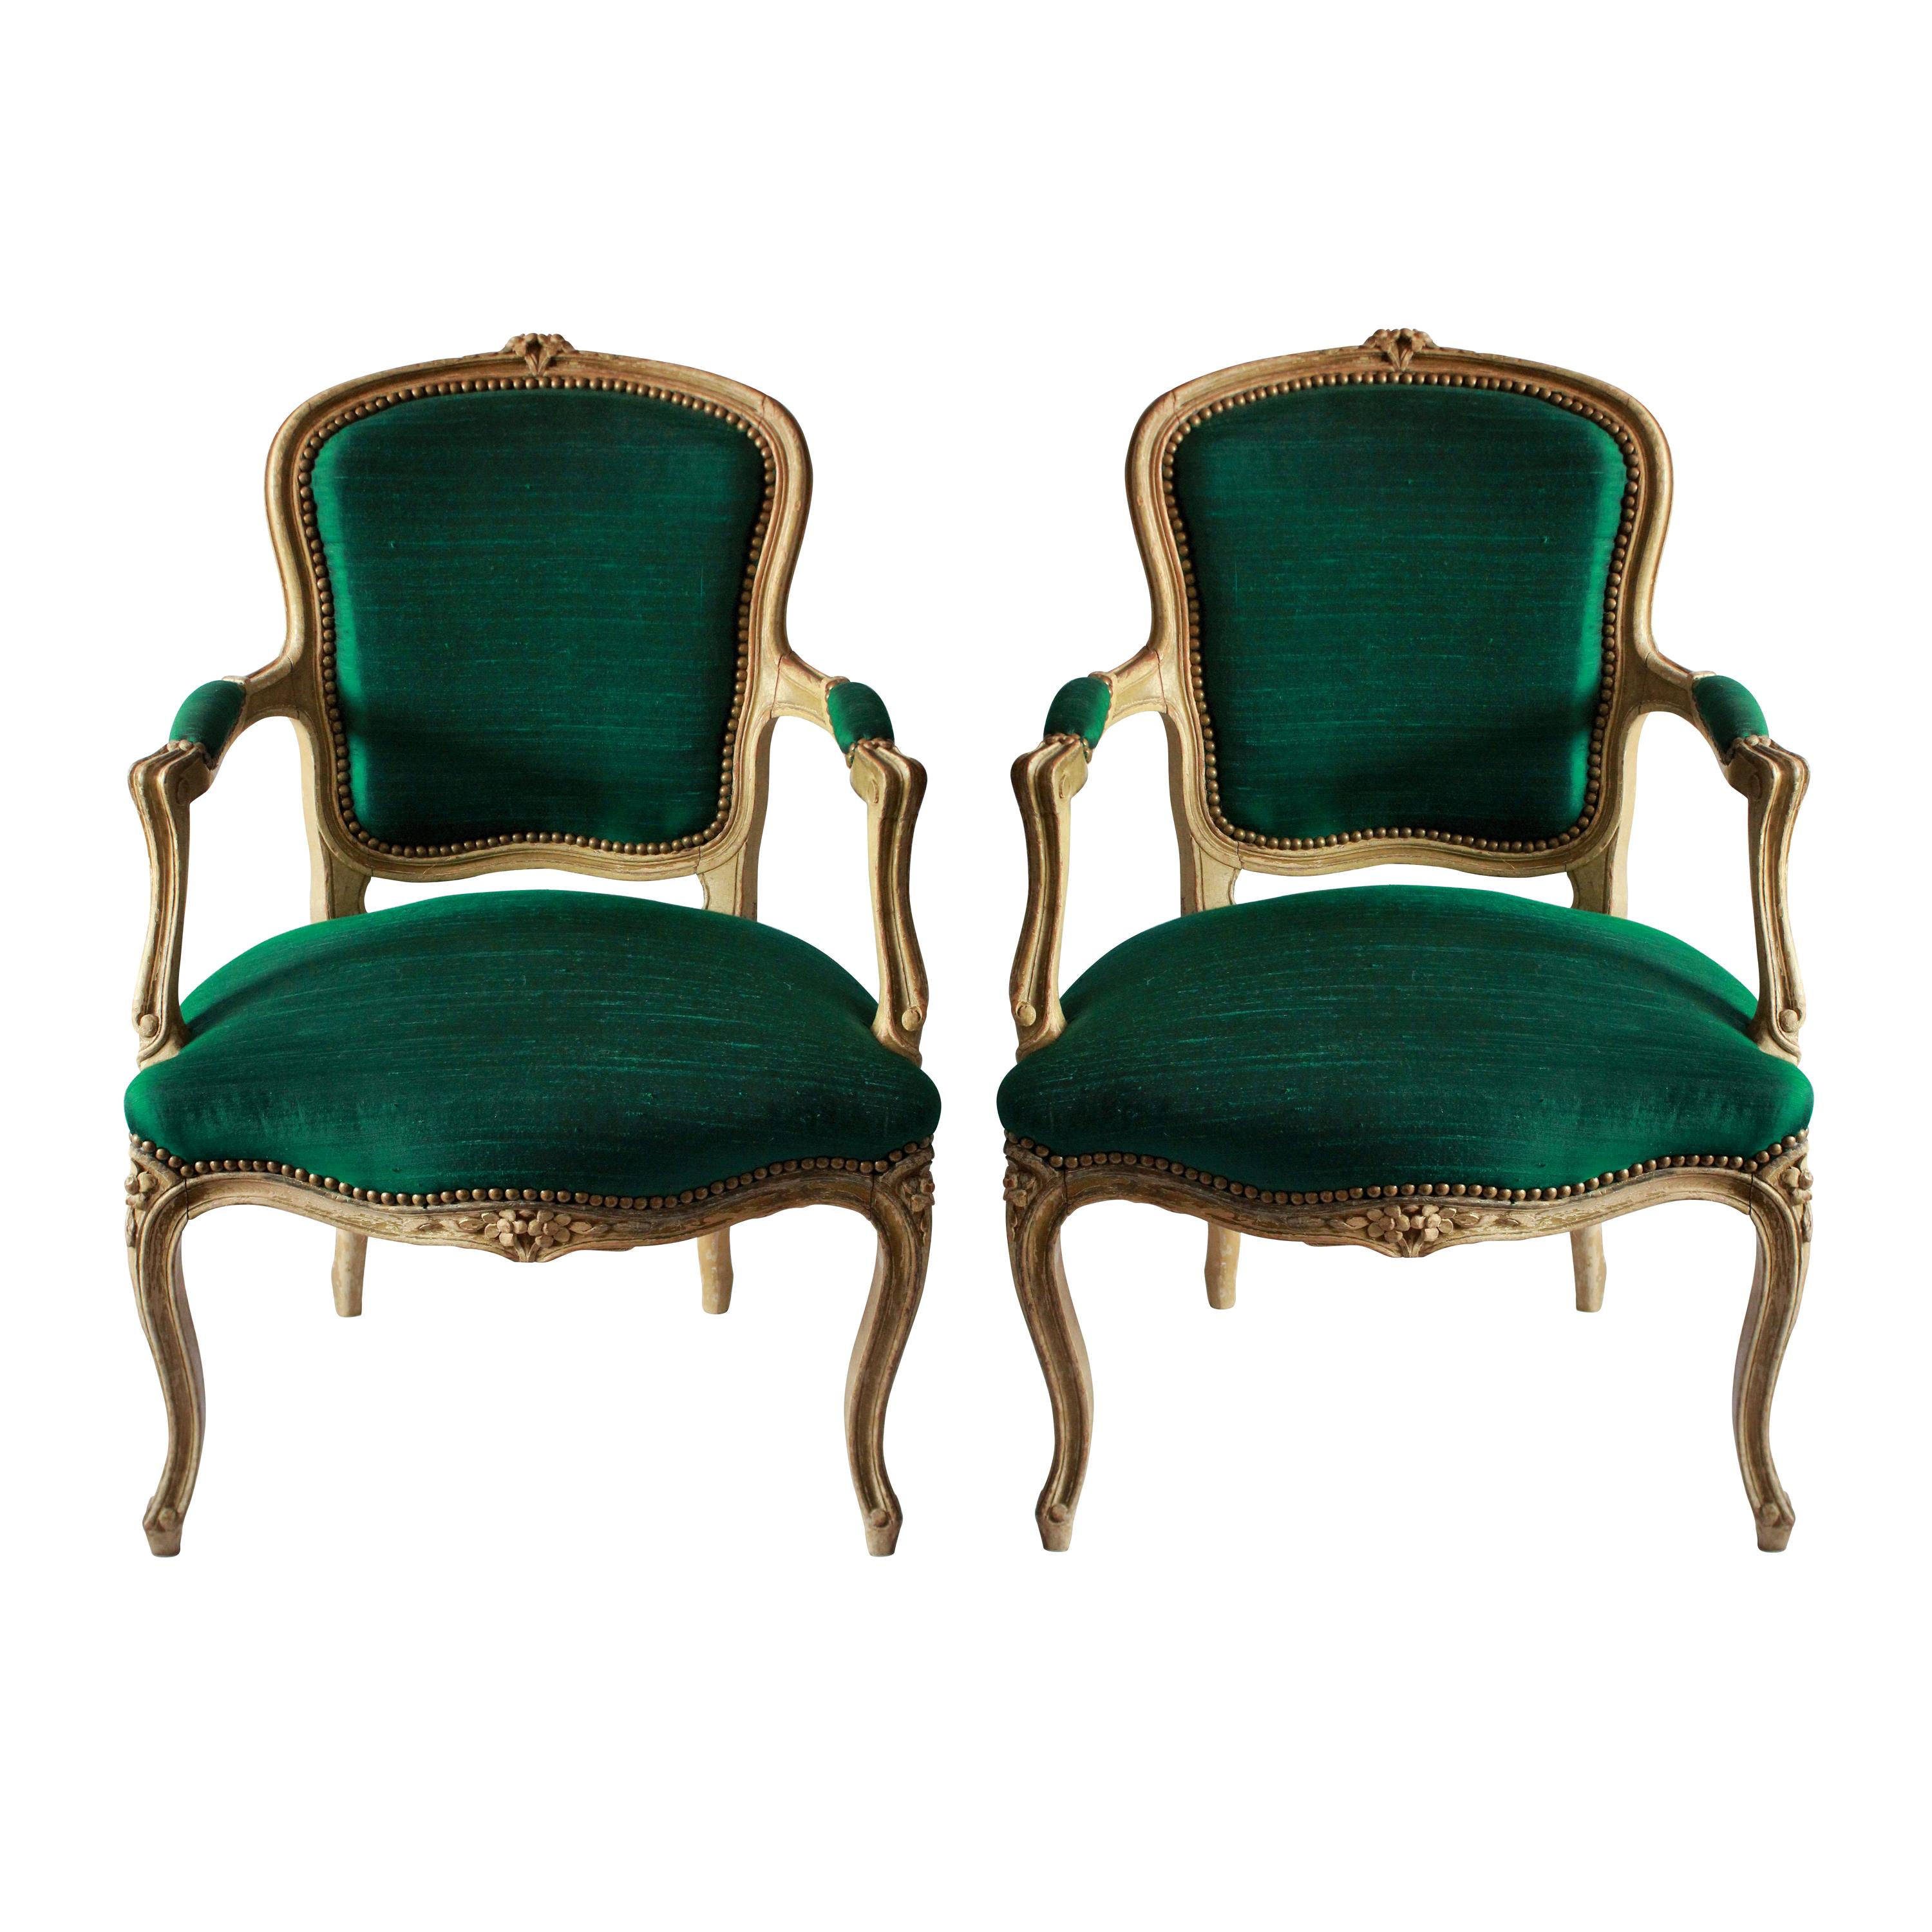 A pair of French 18th century distressed painted armchairs, newly upholstered in emerald green silk.